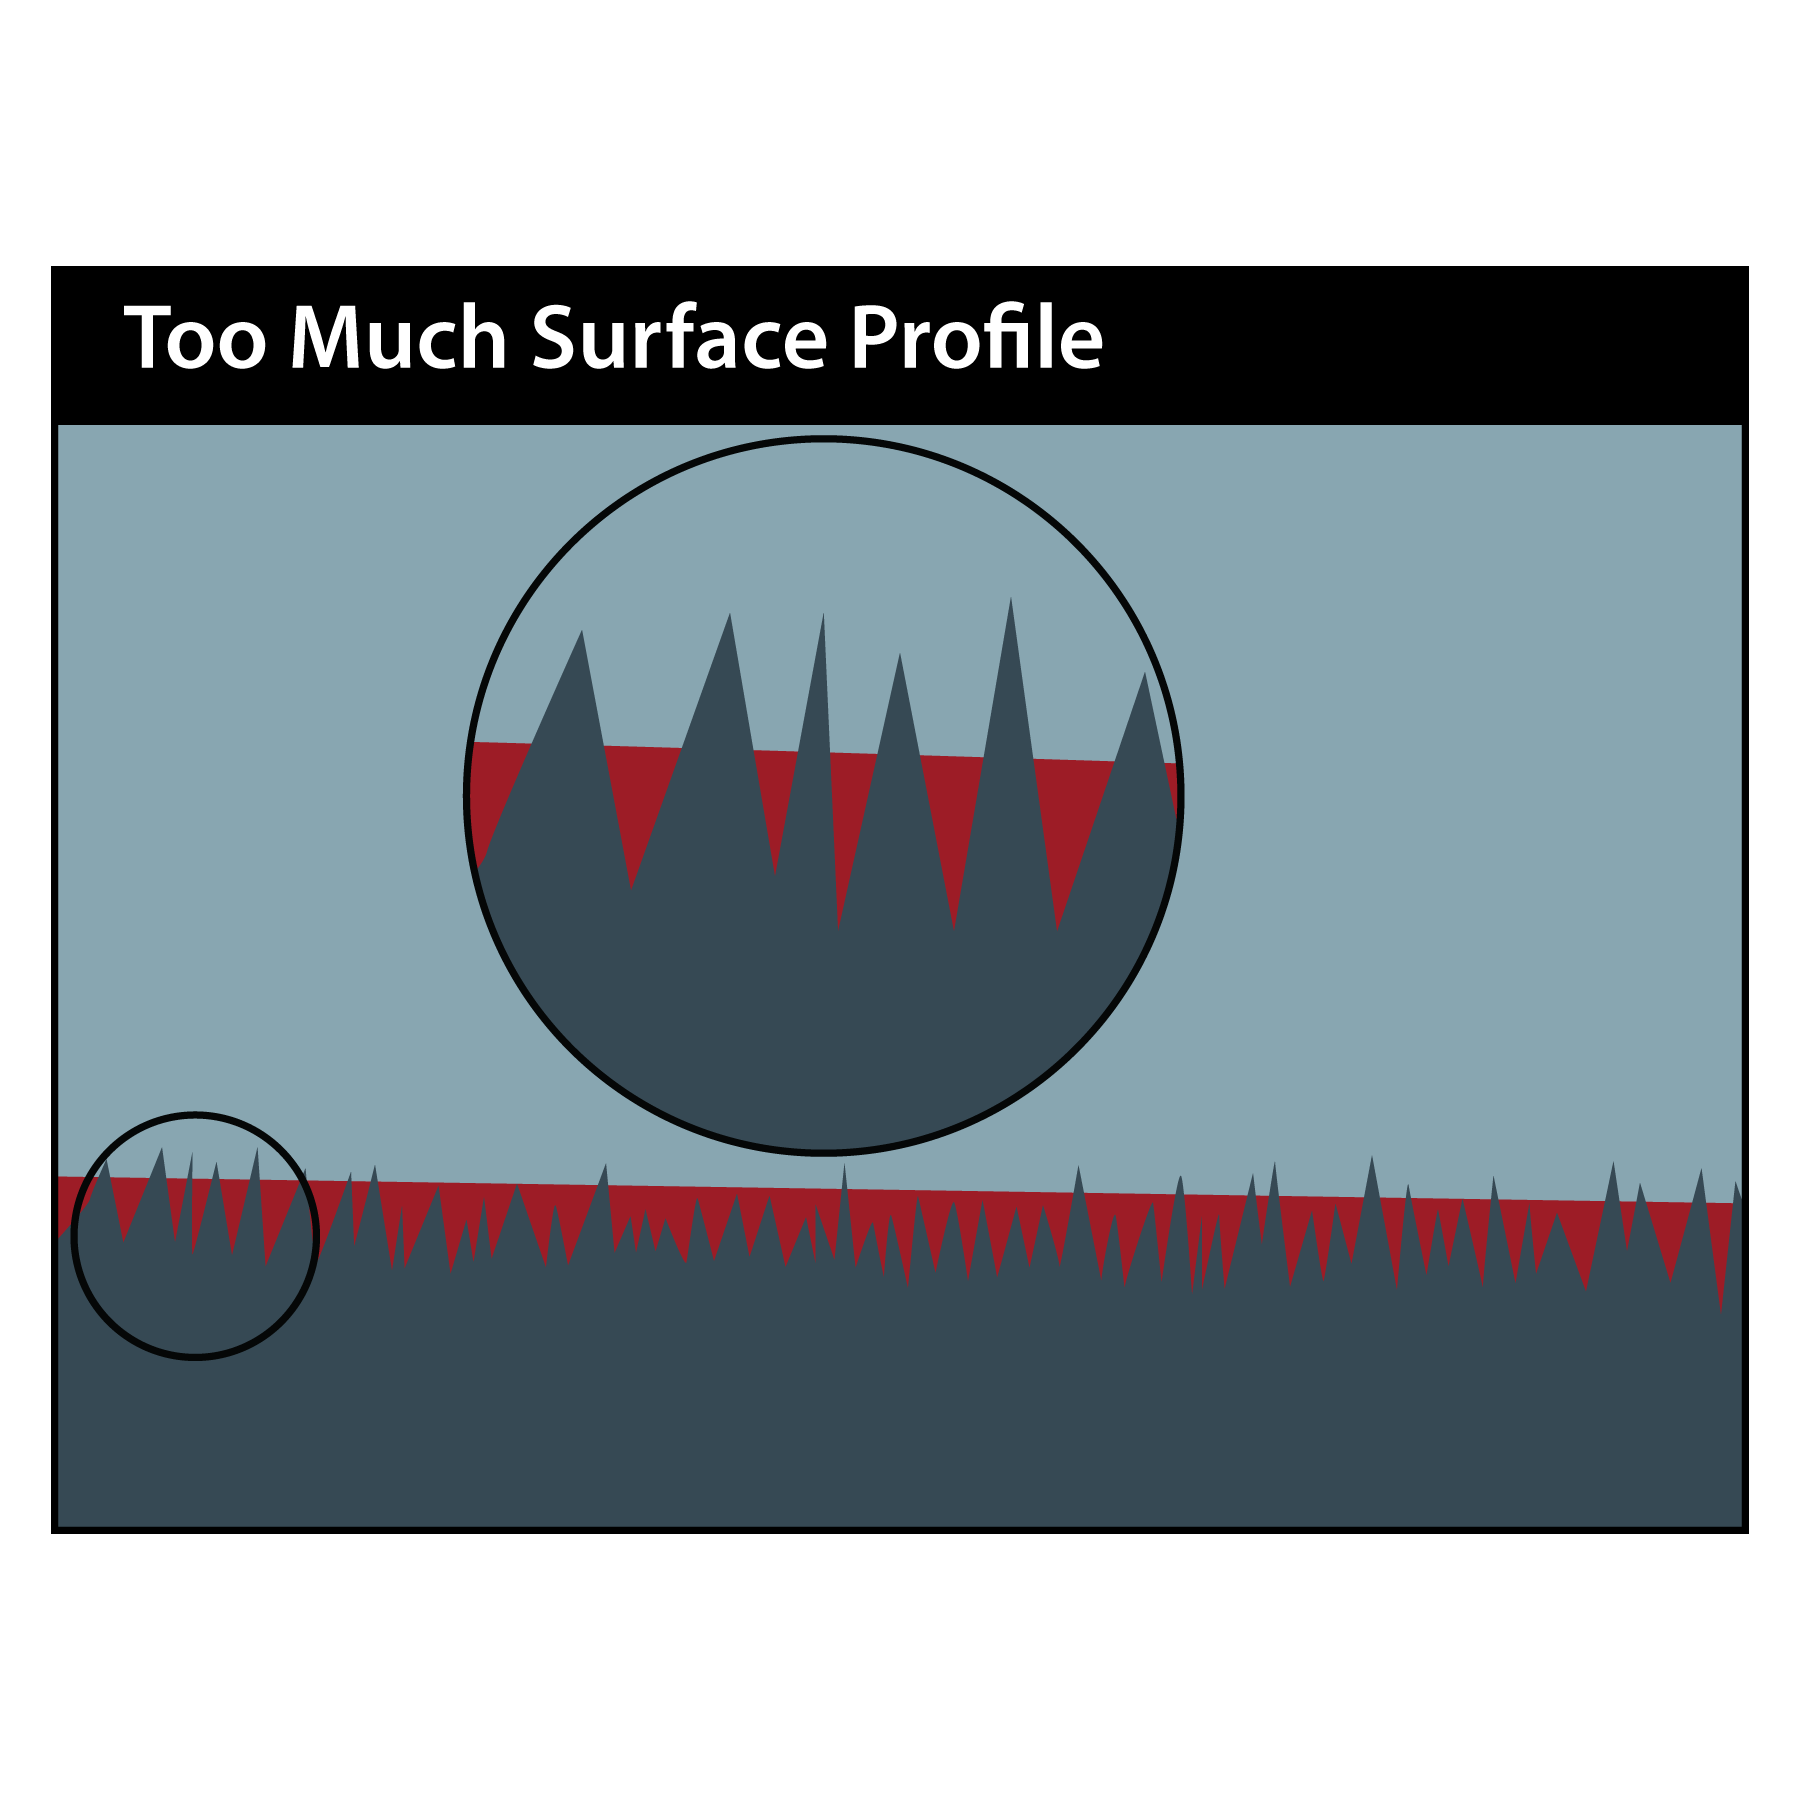 Too Much Surface Profile